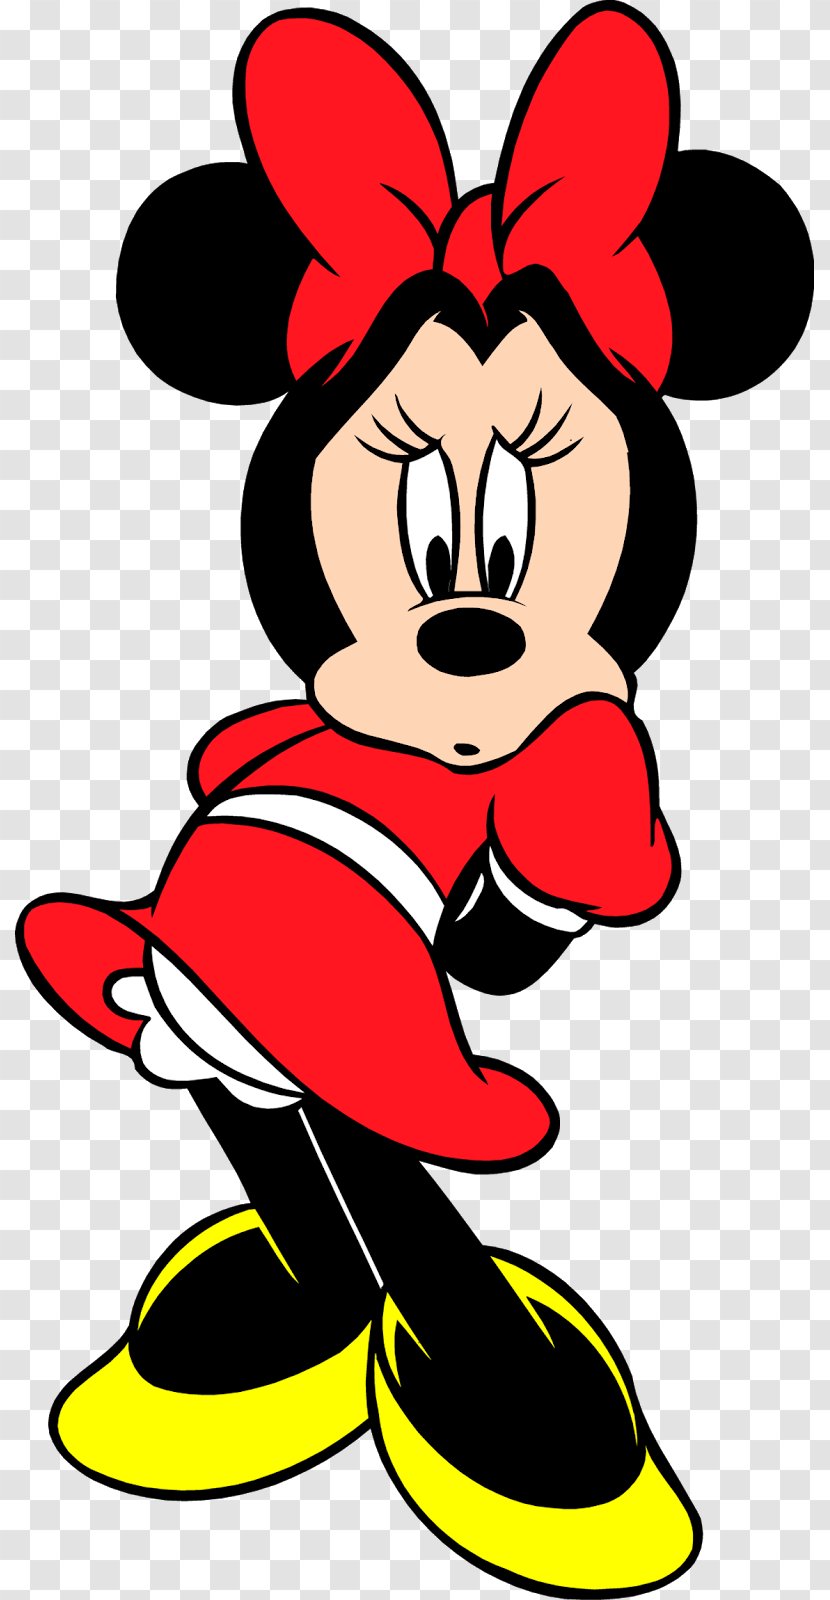 Minnie Mouse Mickey Dress Clip Art - Costume - ็HR Transparent PNG